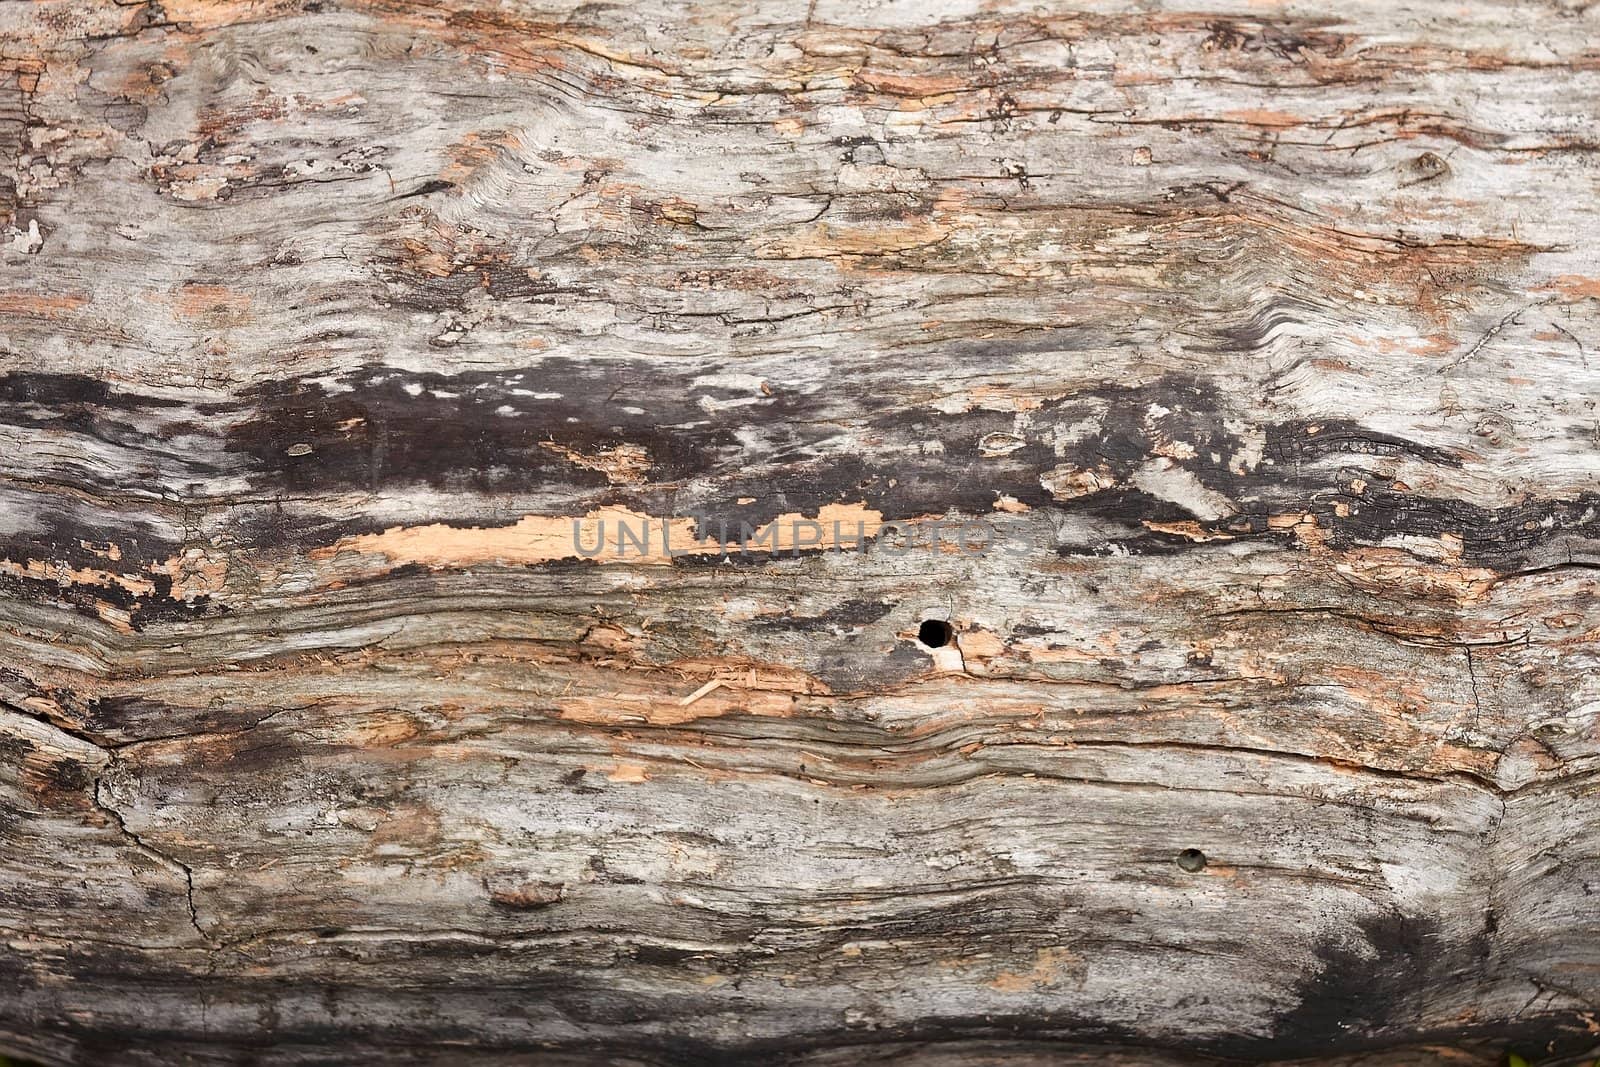 Fragment of old dried wooden logs after weather exposure